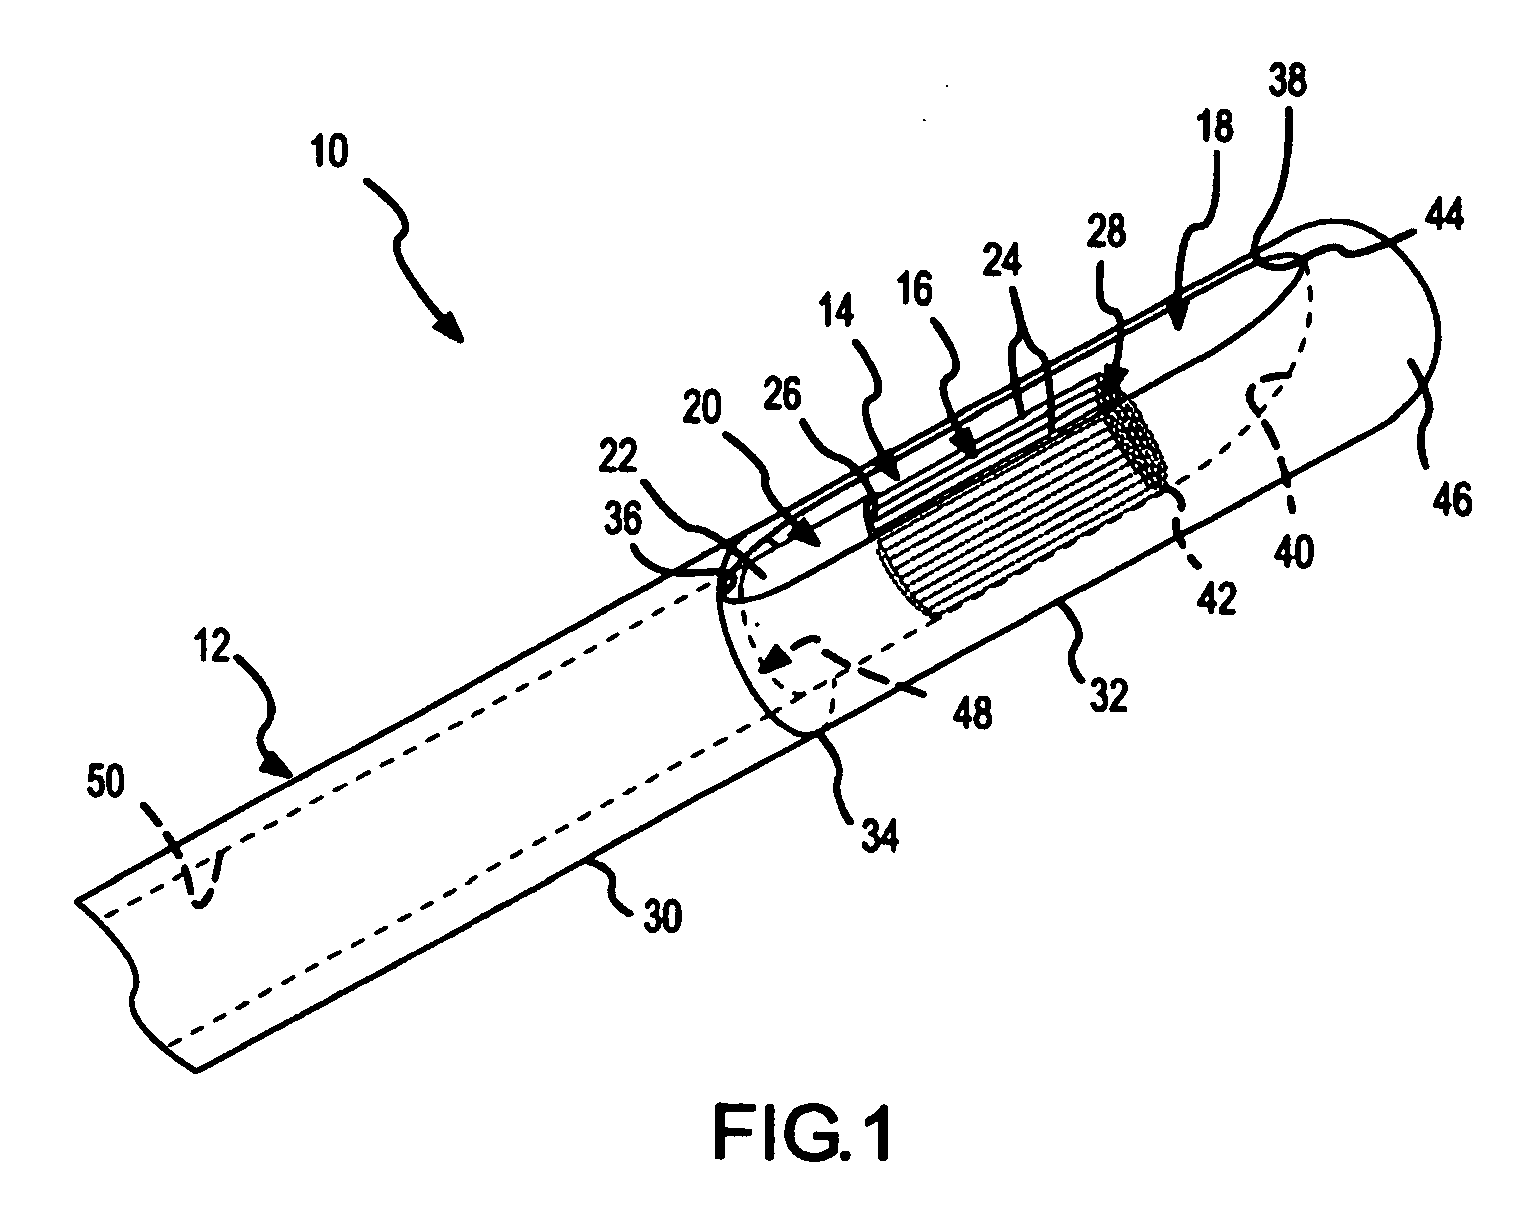 Side-port sheath for catheter placement and translation